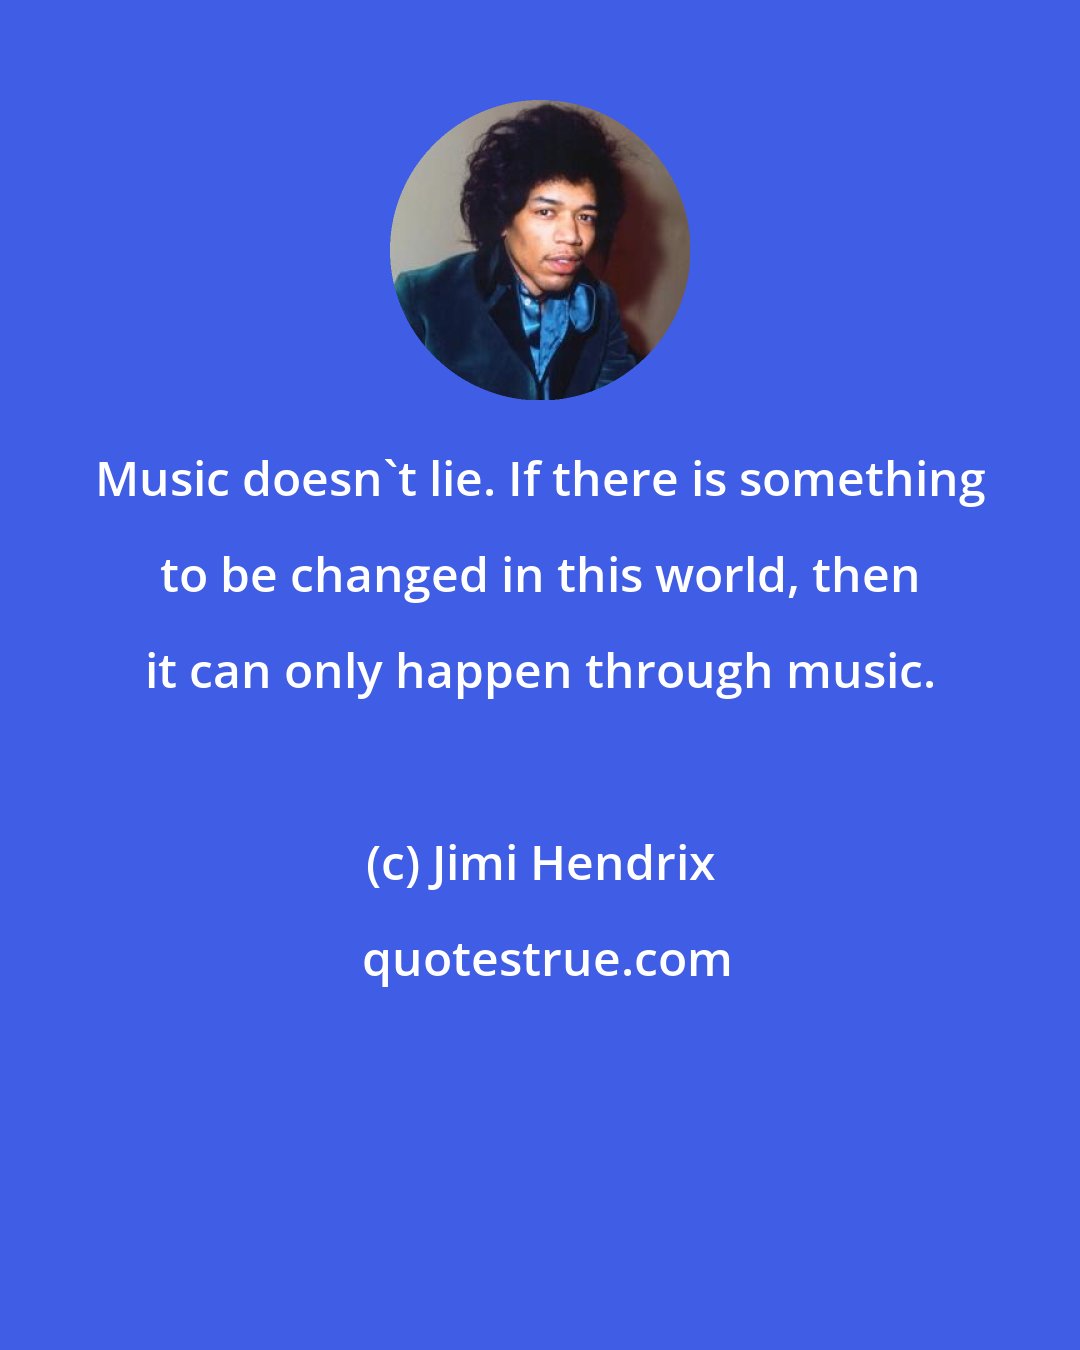 Jimi Hendrix: Music doesn't lie. If there is something to be changed in this world, then it can only happen through music.